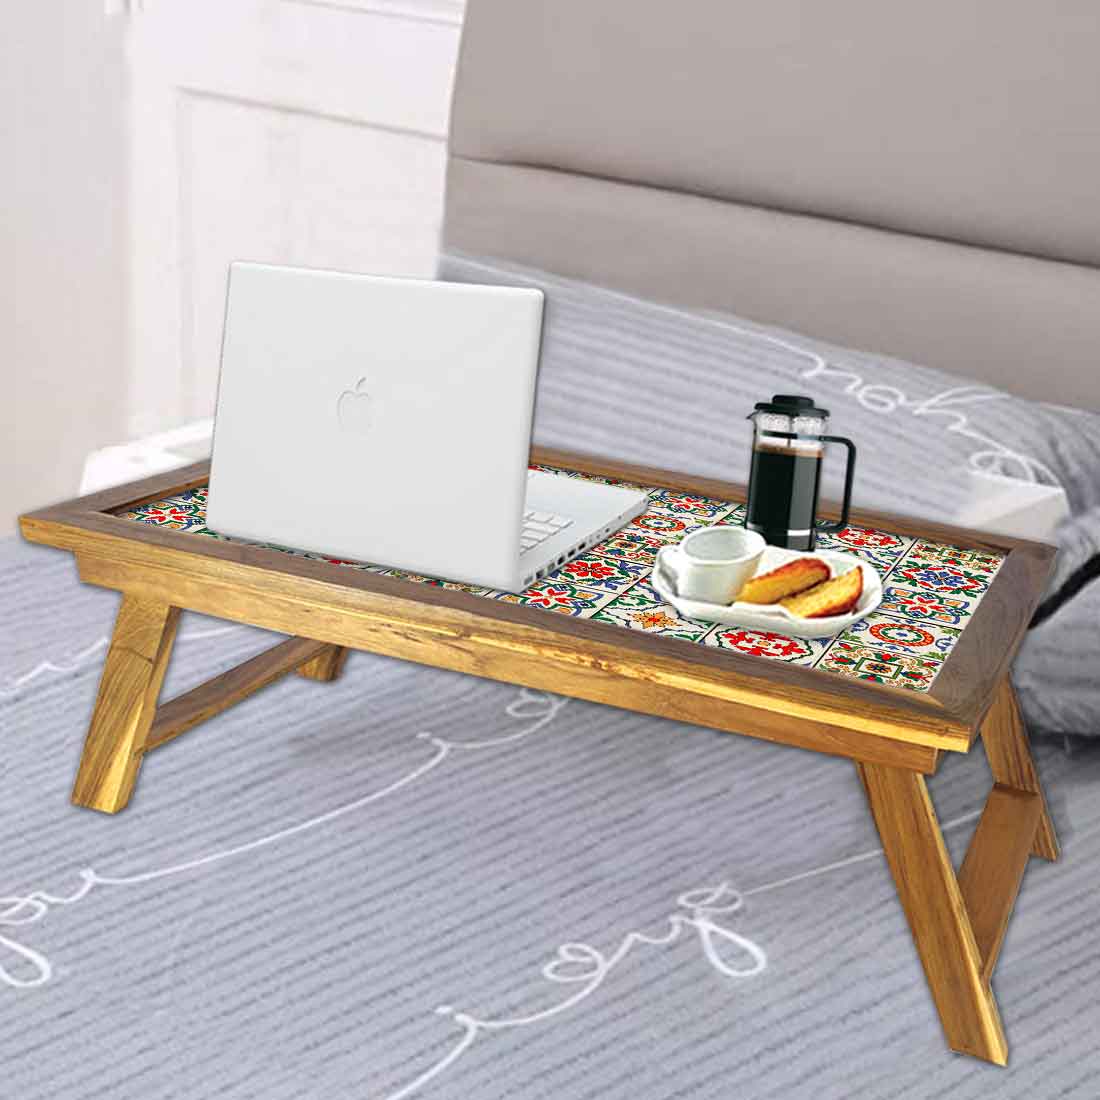 Designer Lapdesk Tray Table for Breakfast in Bed Study Desk - Mexican Style Nutcase